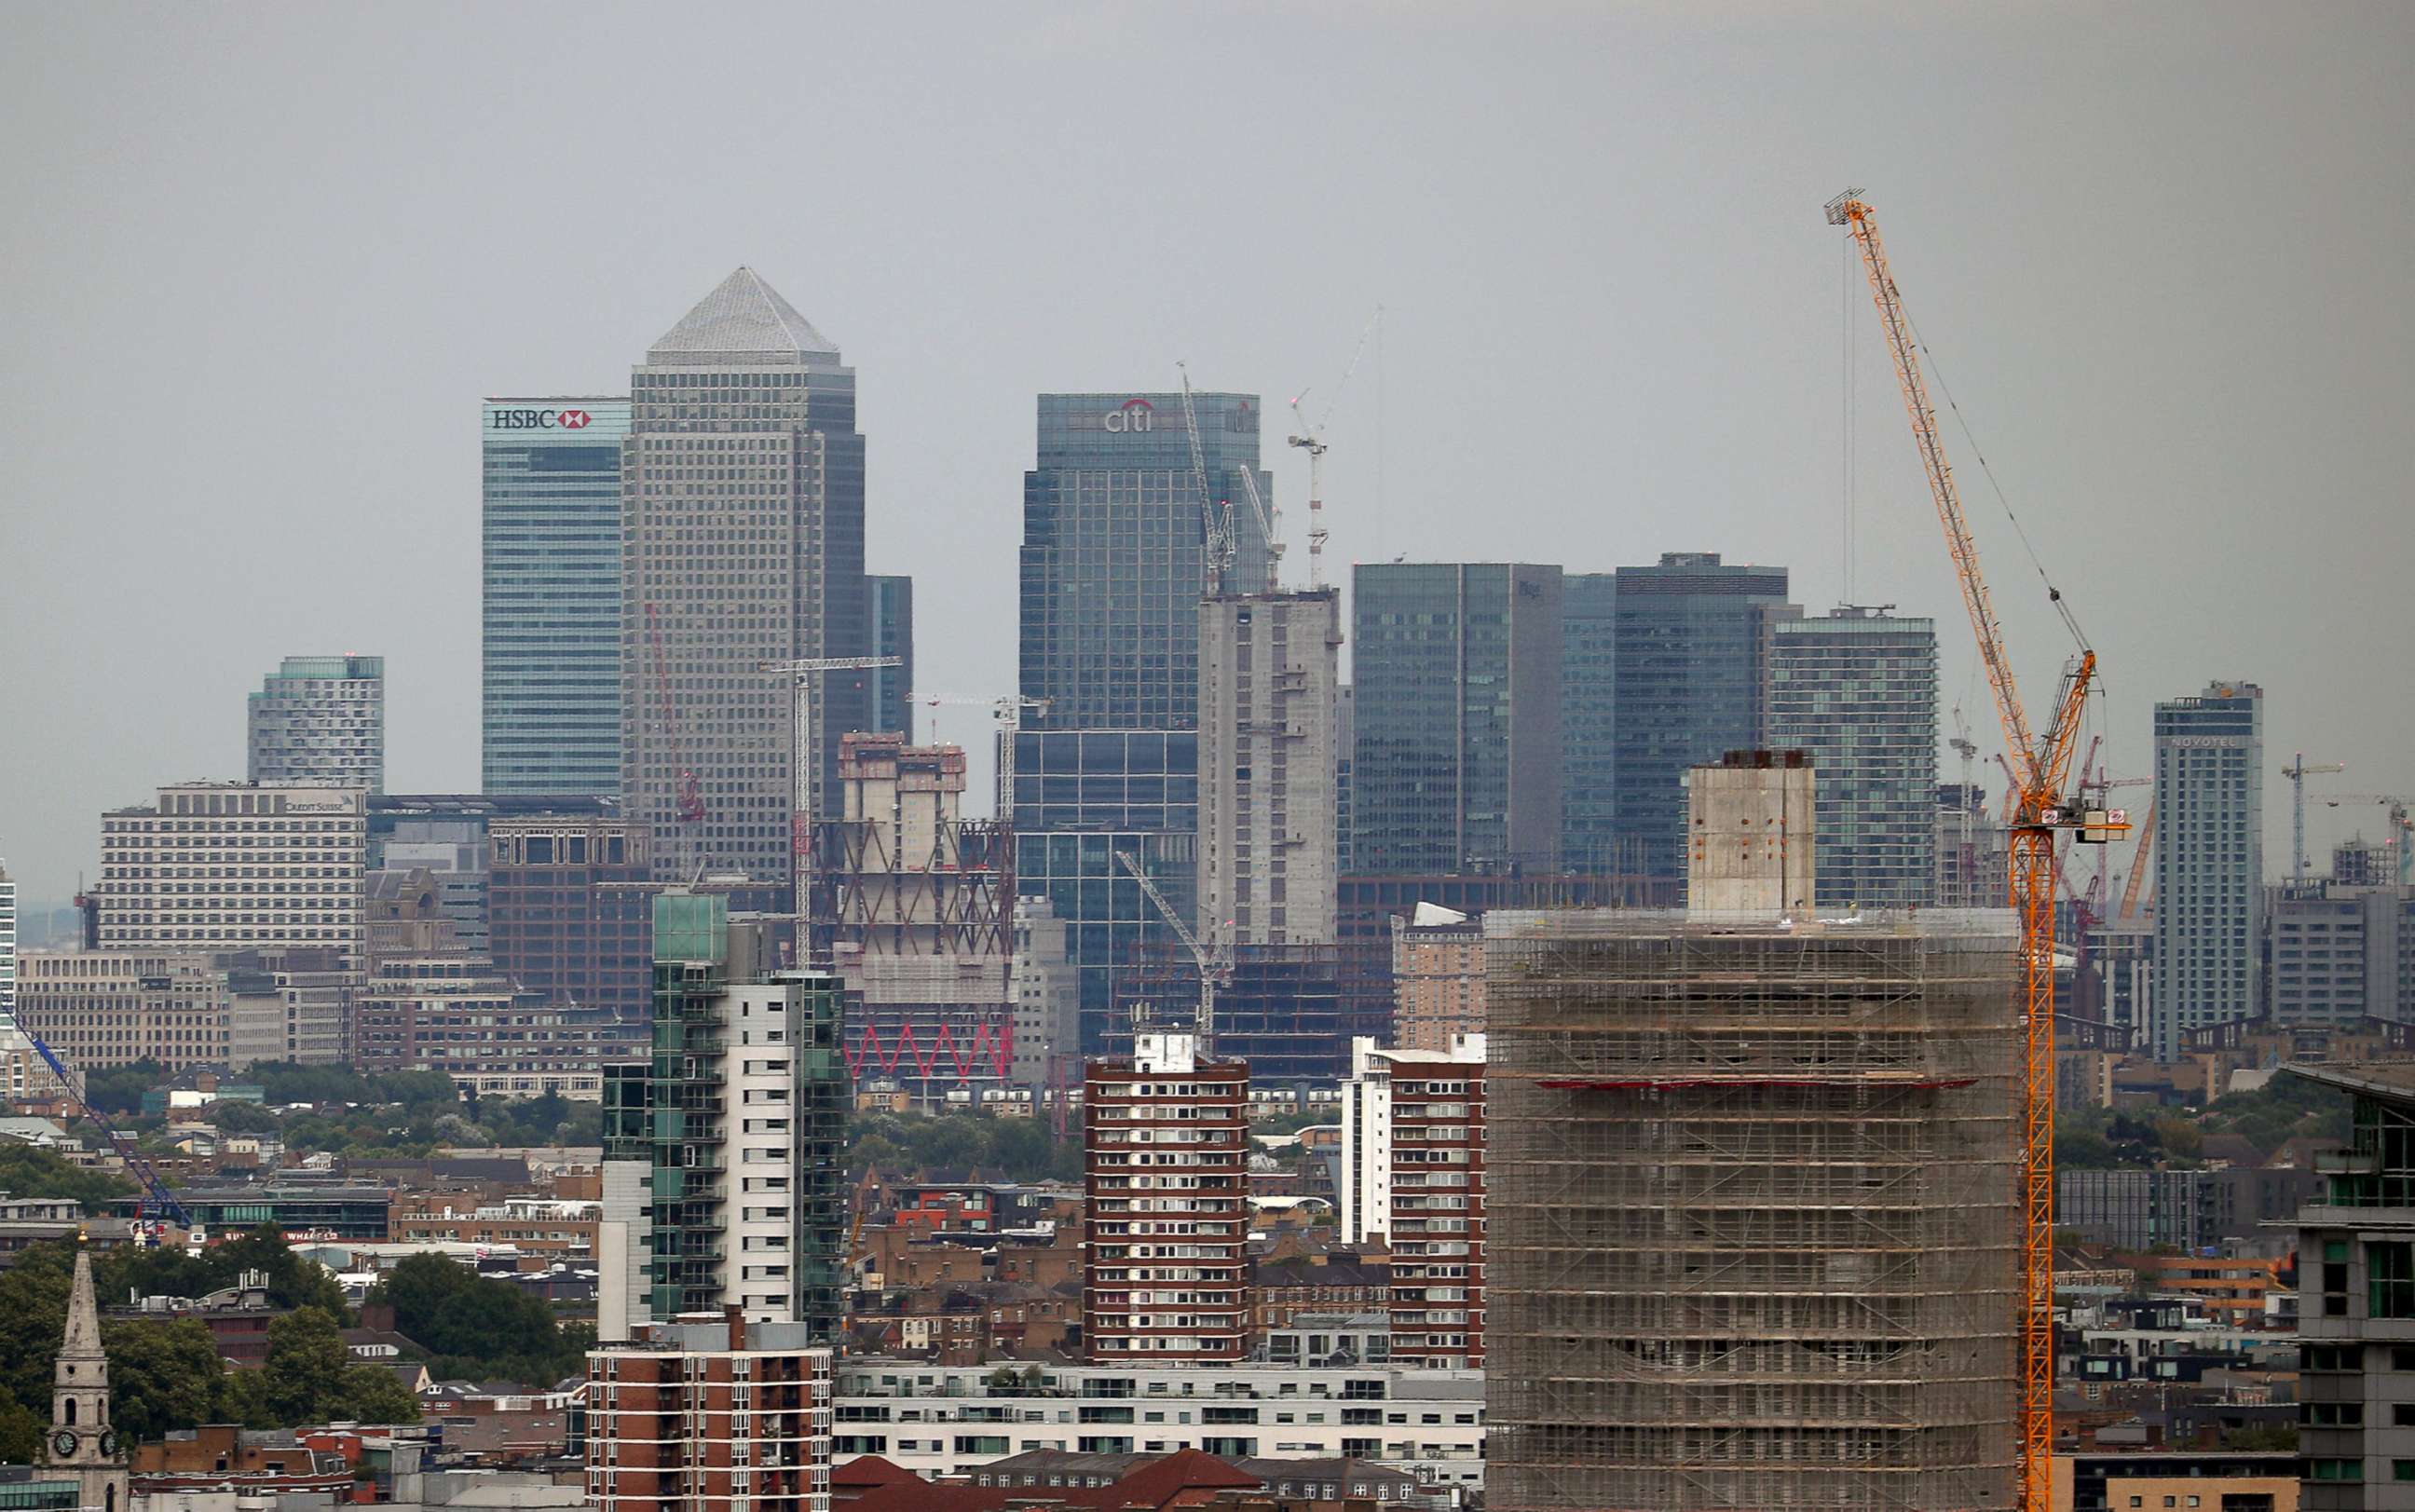 PHOTO: The Canary Wharf financial district is seen from the Broadway development in central London, Britain in this Aug. 23, 2017 file photo.